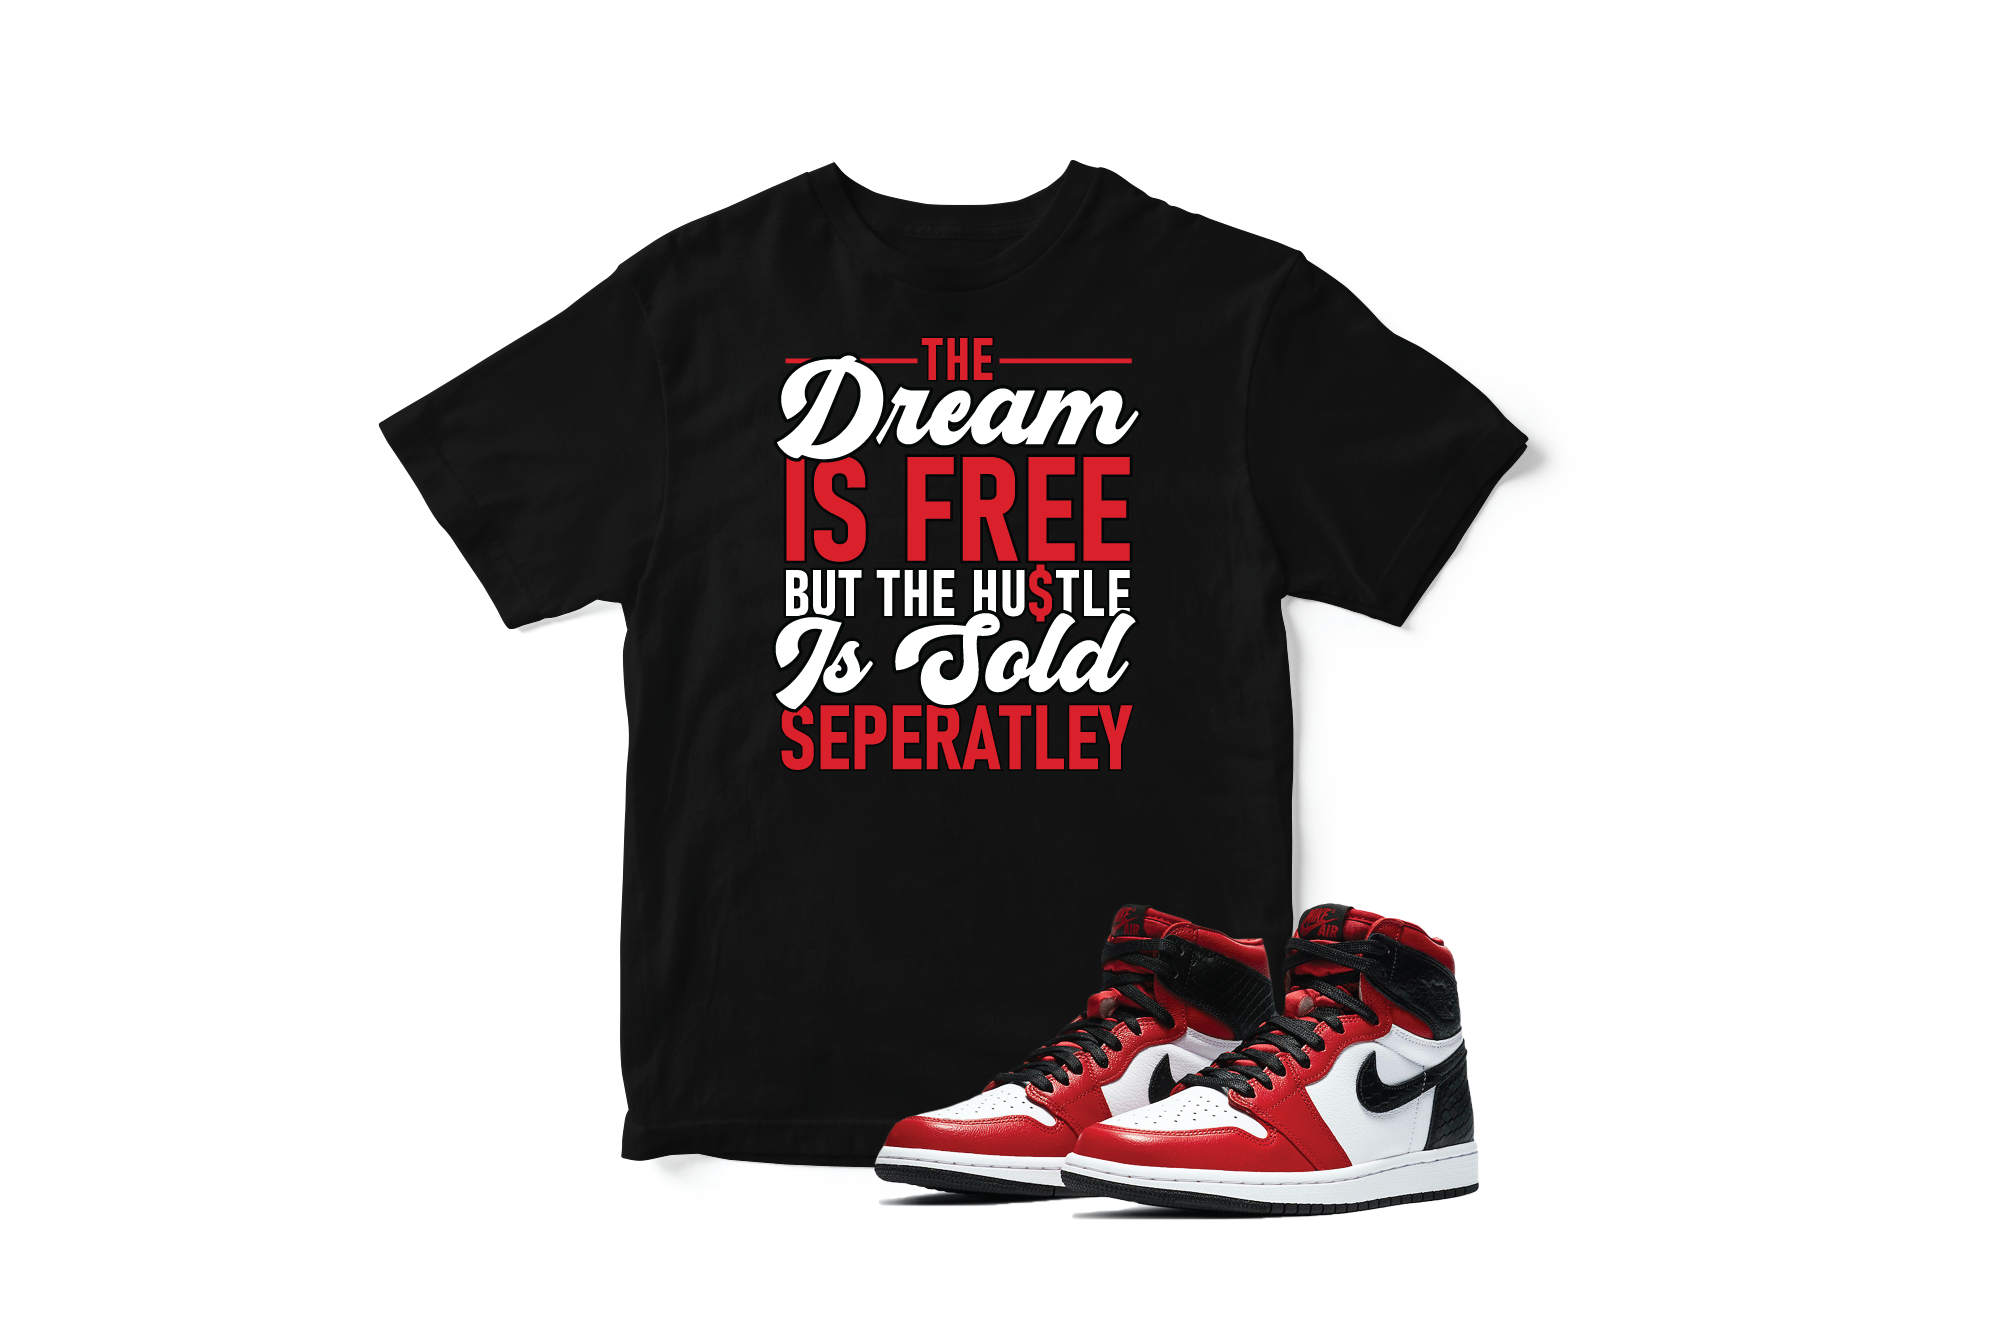 'The Dream Is Free' in Satin Snake CW Short Sleeve Tee